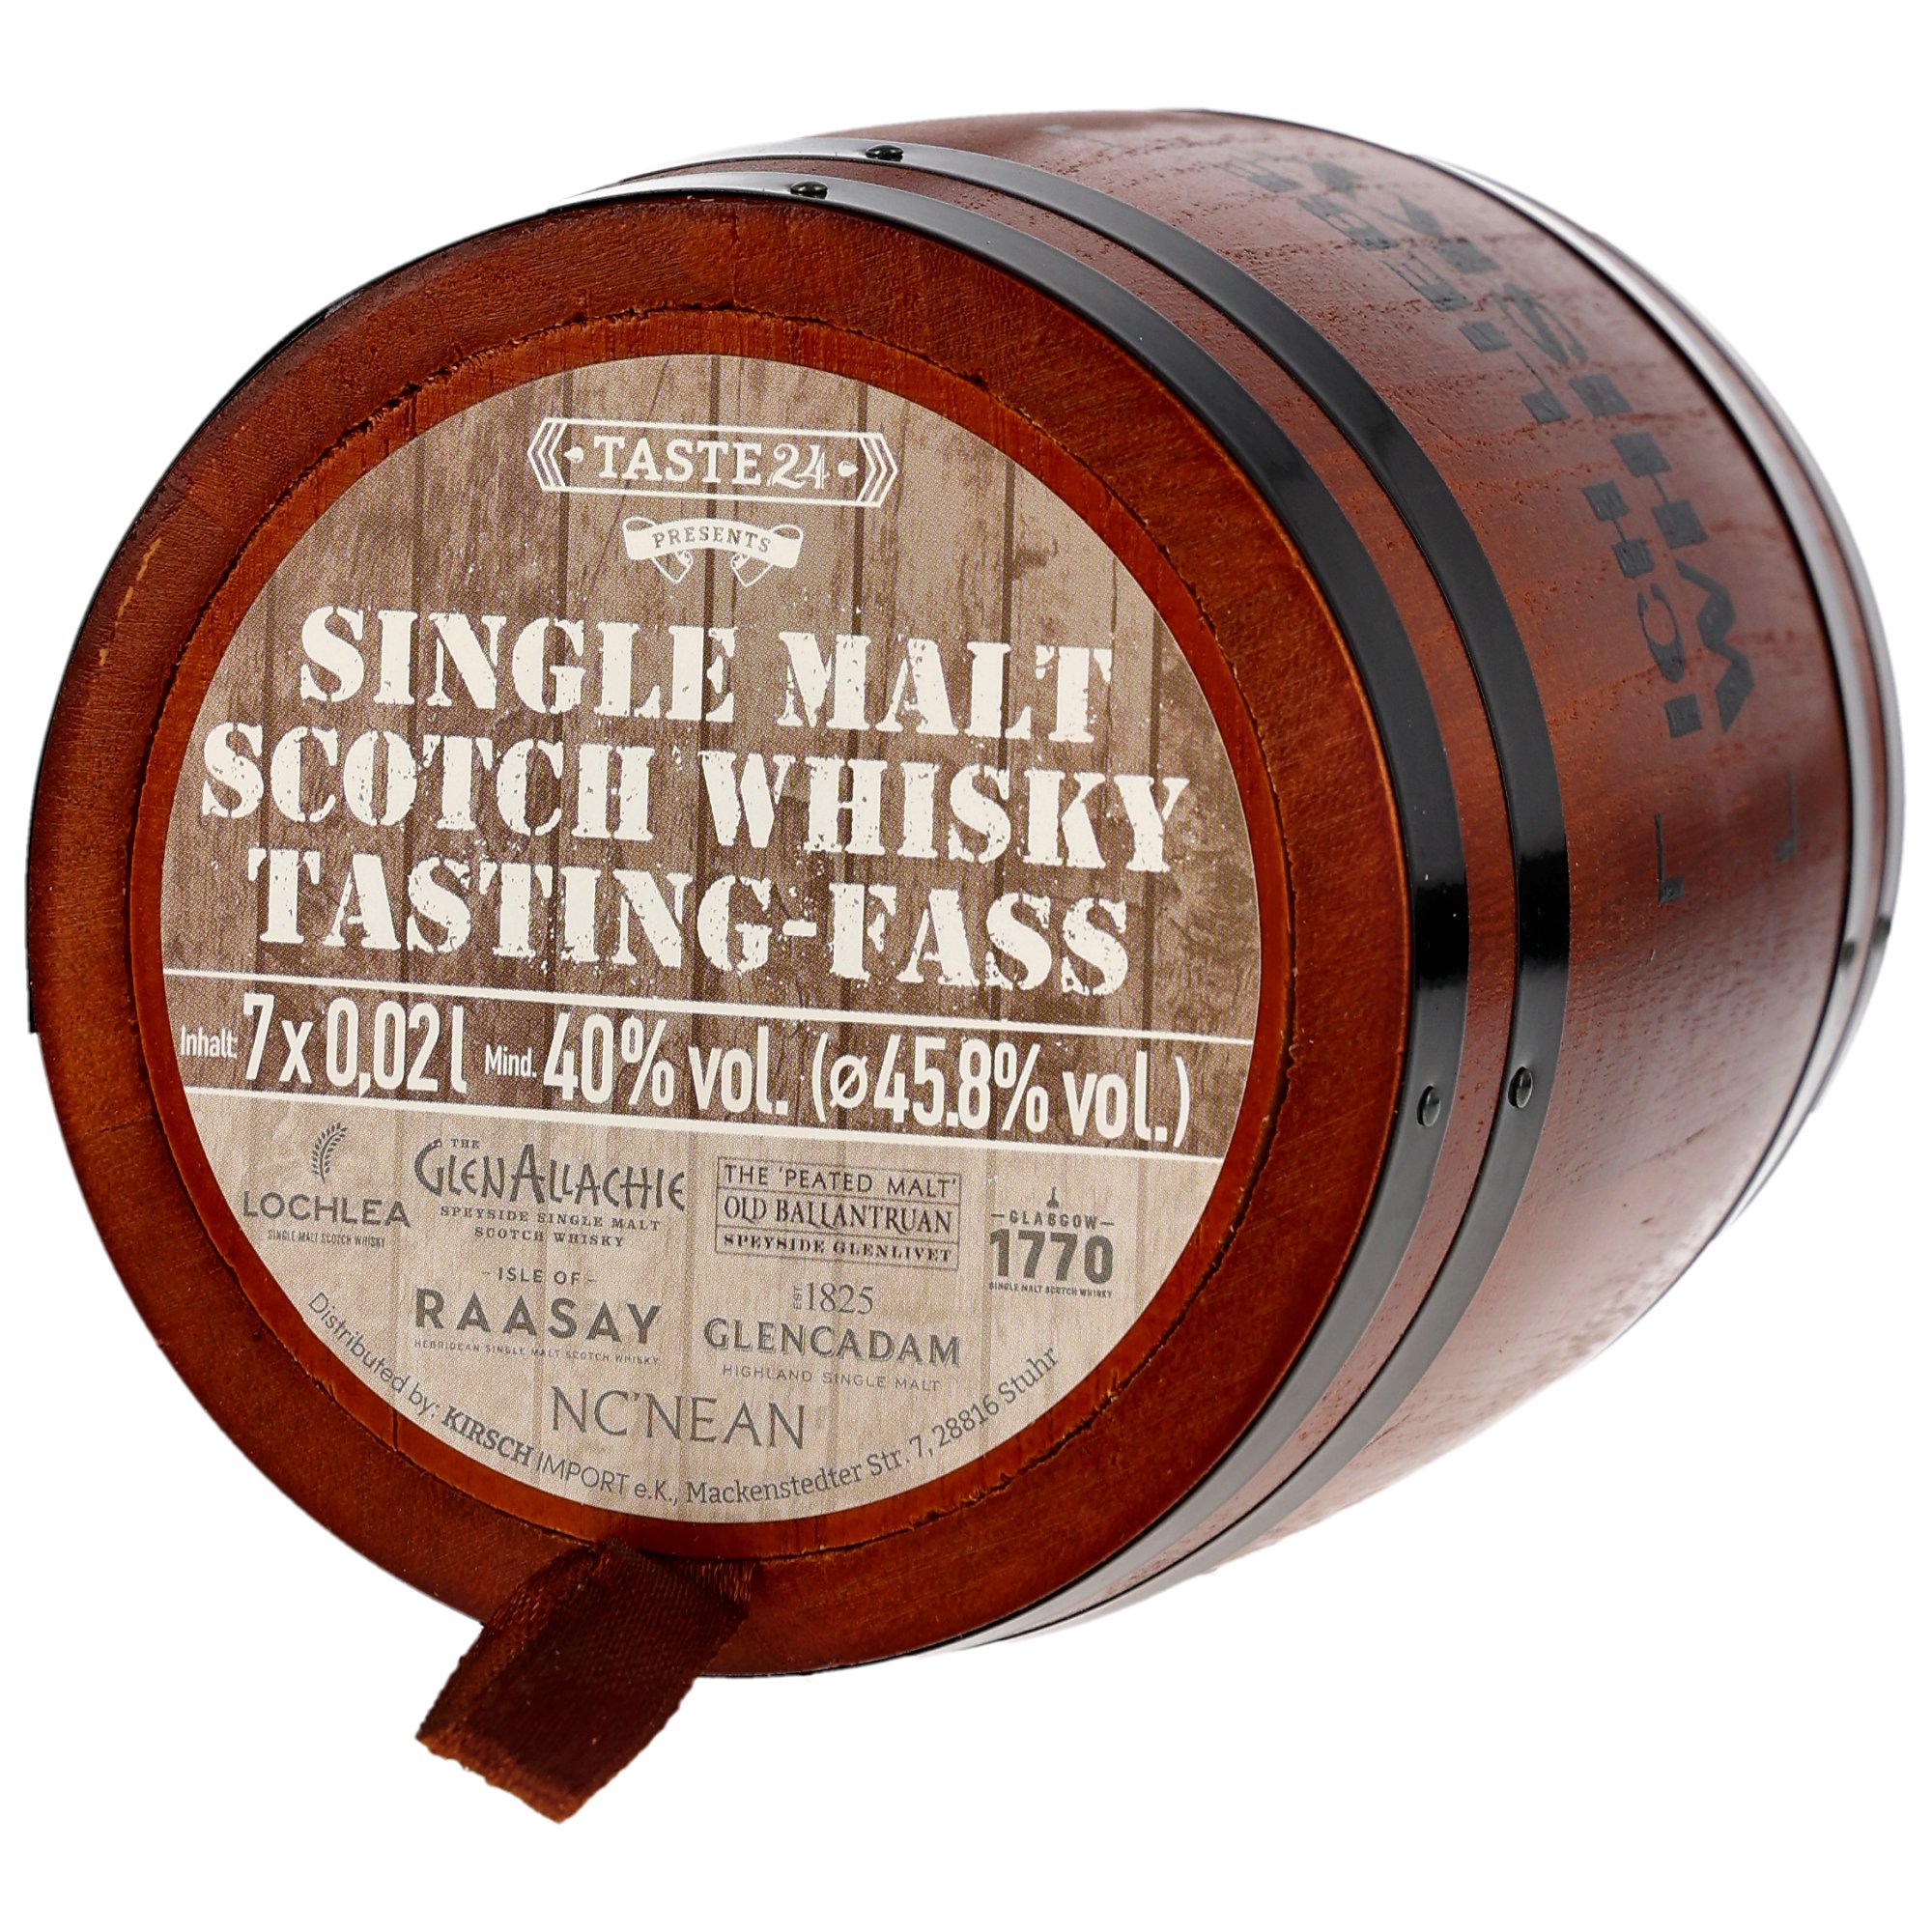 Whisky Tasting Fass - ICH LIEBE WHISKY - Scotch Whisky 45.8% 7x 0,02l